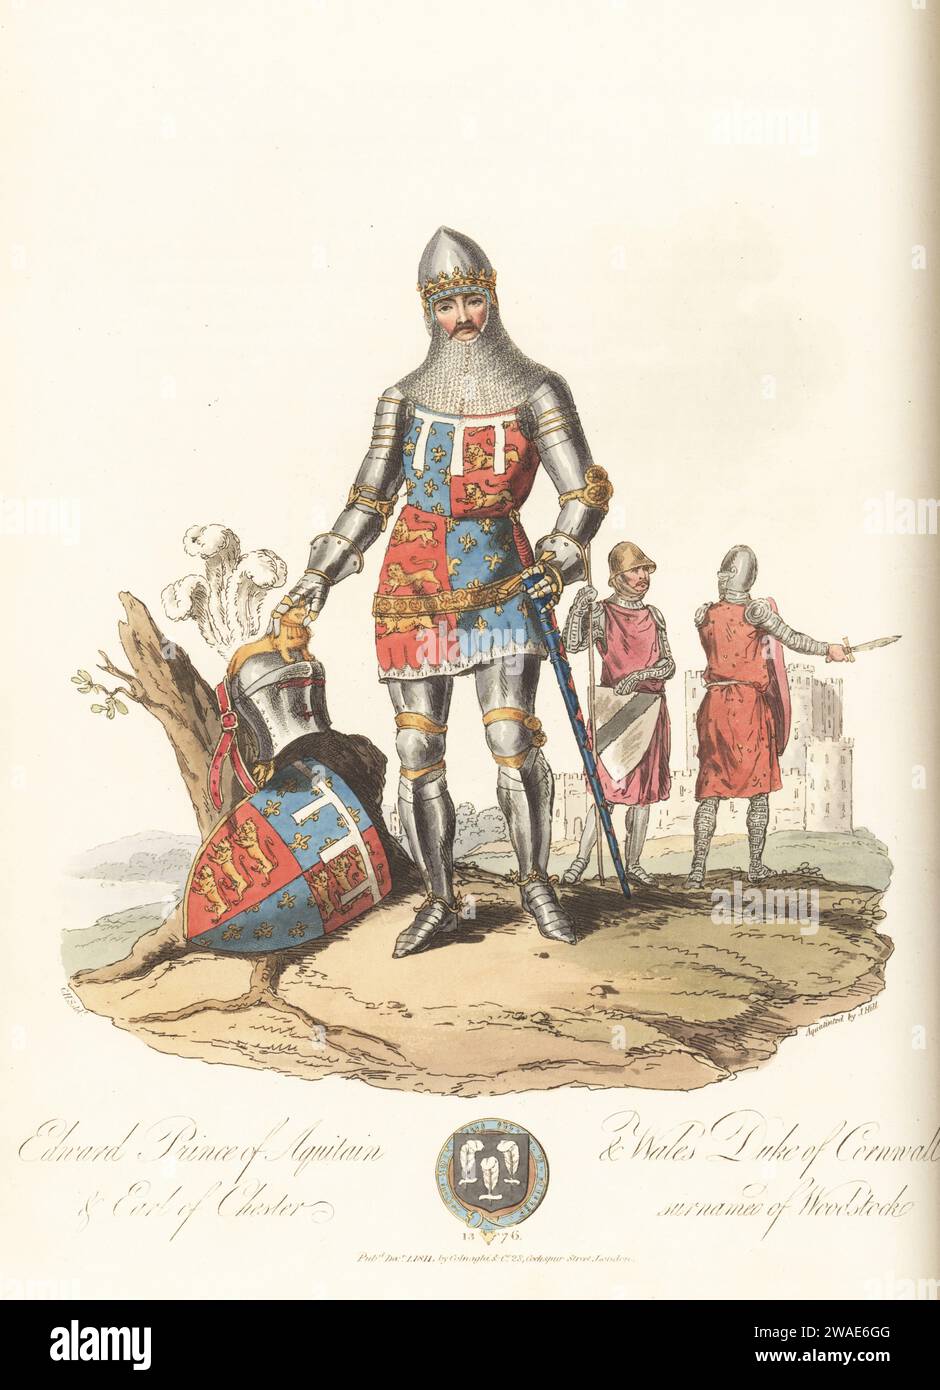 Edward of Woodstock, the Black Prince, Prince of Aquitain and Wales, Duke of Cornwall, Earl of Chester, 1330-1376. In skullcap with coronet, chainmail gorget, suit of plate armour and emblazoned surcoat, great helm with three plumes and armorial shield. From his copper effigy in Canterbury Cathedral. In the background, two soldiers and Rochester Castle. Handcoloured copperplate engraving aquatinted by John Hill after an illustration by Charles Hamilton Smith from his own Selections of Ancient Costume of Great Britain and Ireland, Colnaghi and Co., London, 1814. Stock Photo